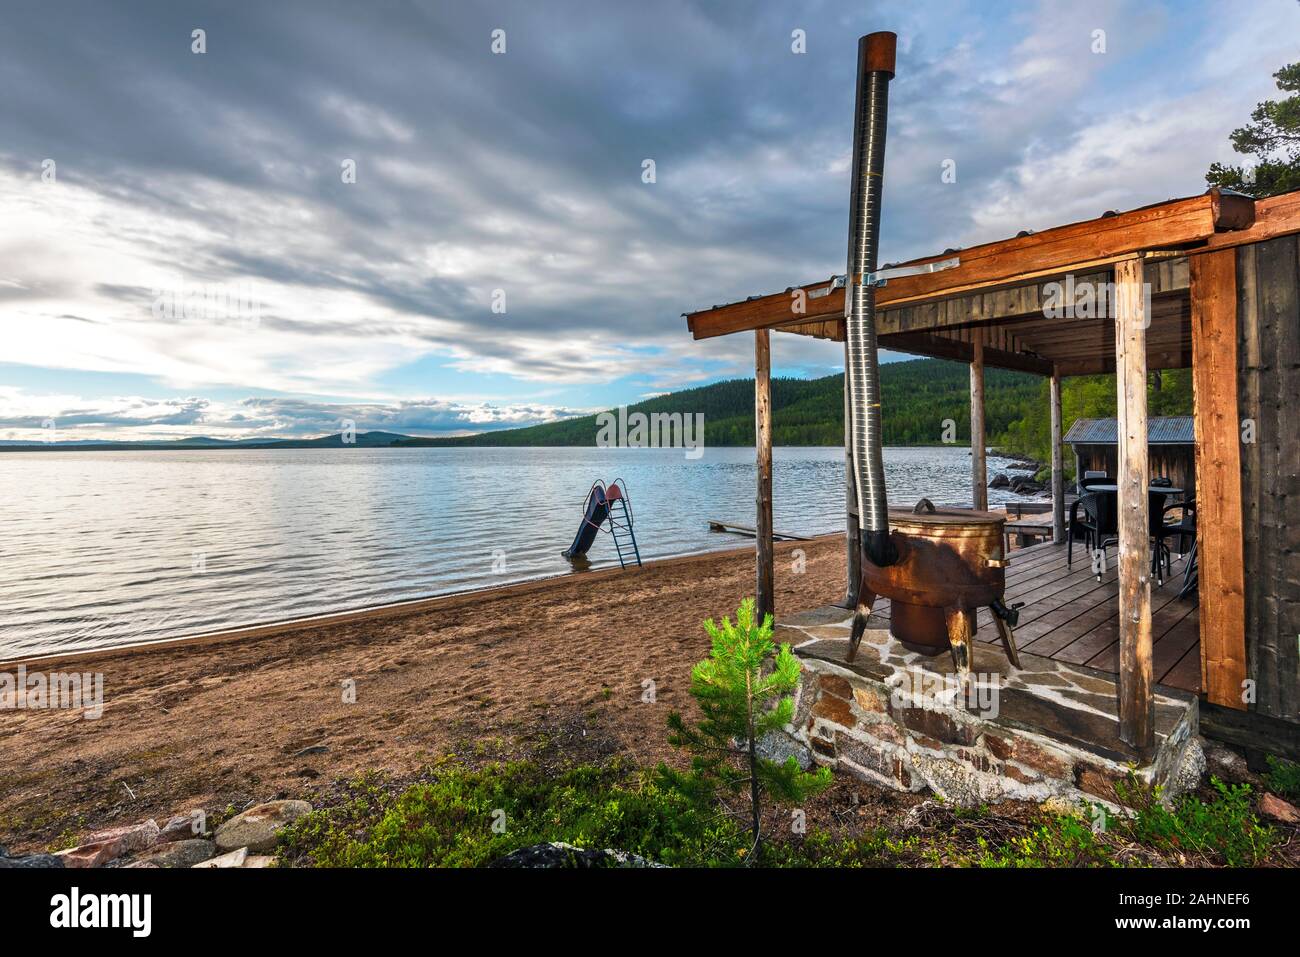 Terrace of the Wooden house with wood stove for heating in the border of Sandsjon lake in Swedish Lapland. Vasterbotten county, Norrland, Sweden. Stock Photo